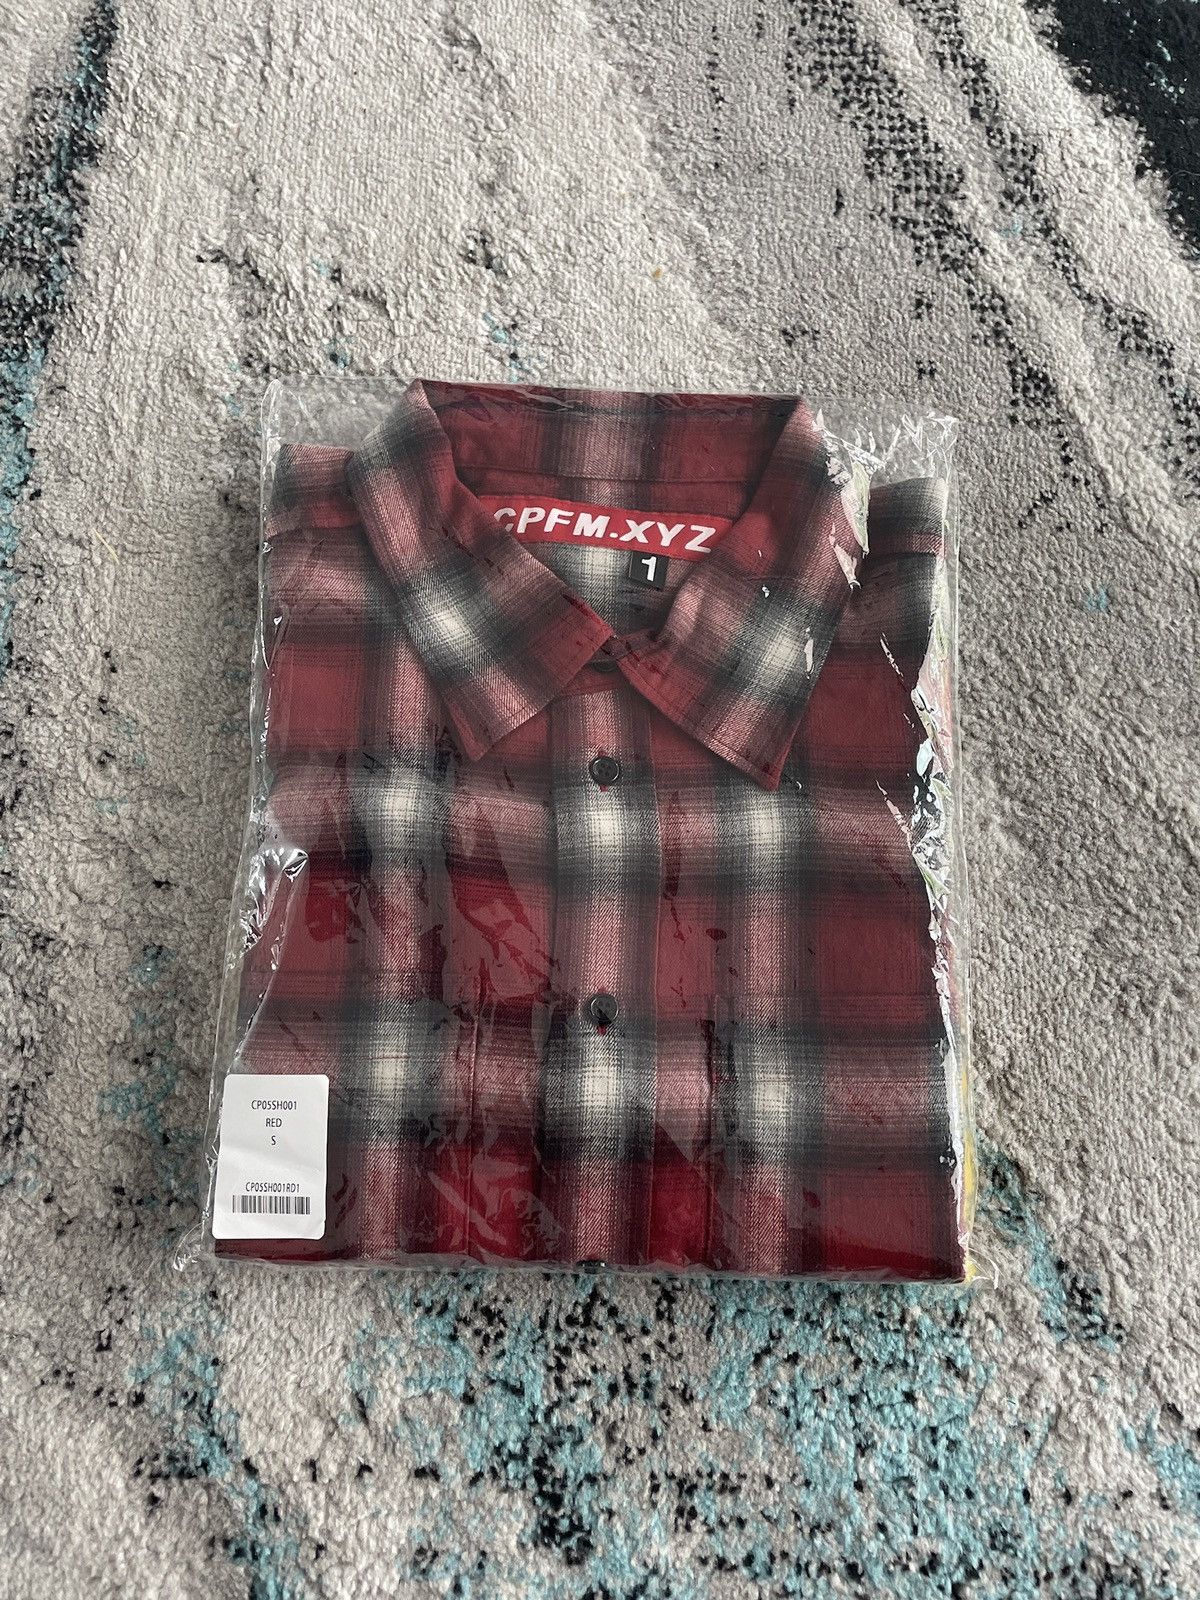 Cactus Plant Flea Market Cactus Plant Flea Market Double Vision Red Check  Shirt | Grailed